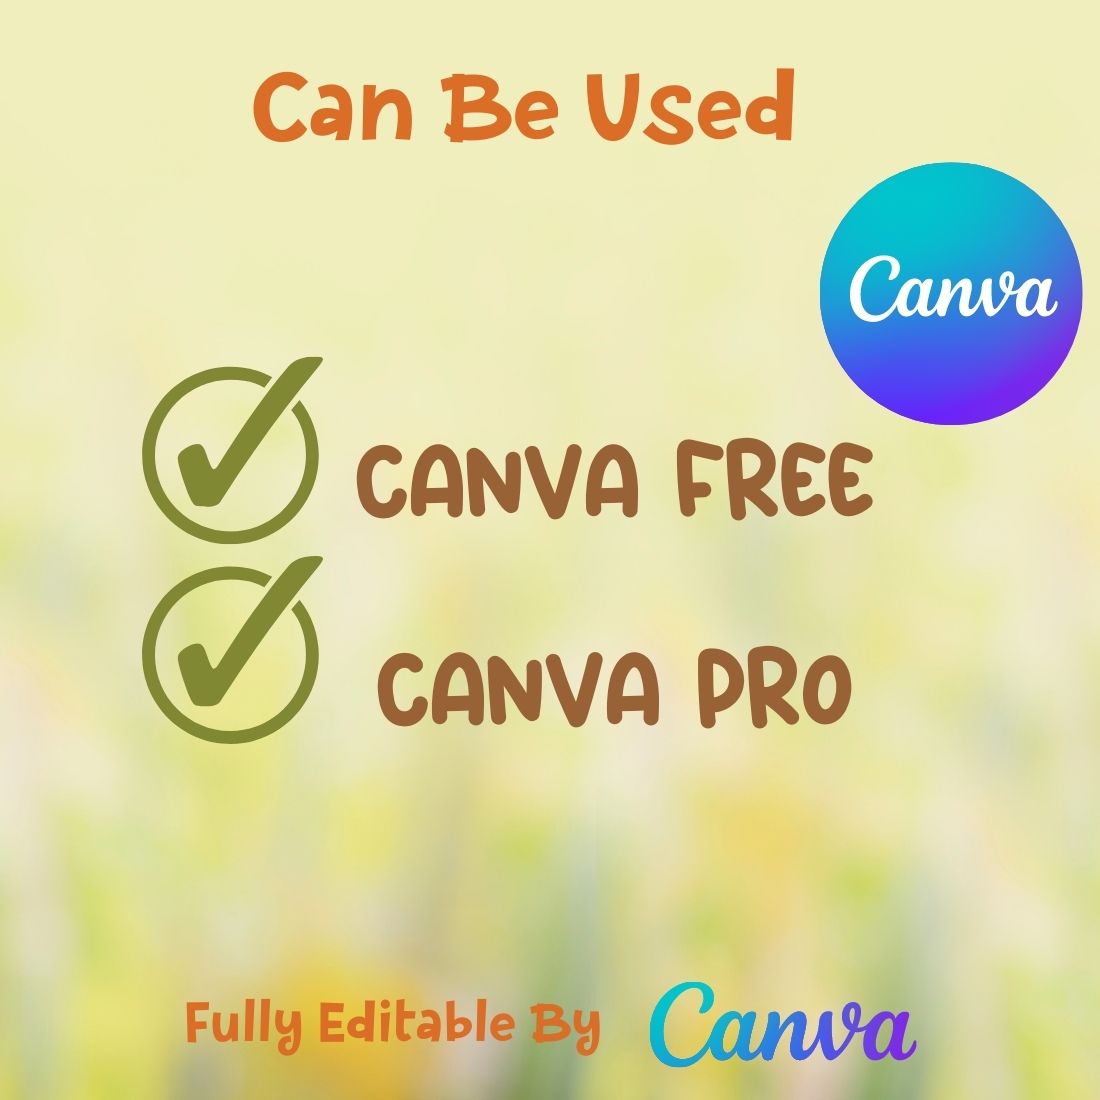 Blurry photo of a camera with the text can be used canva free.